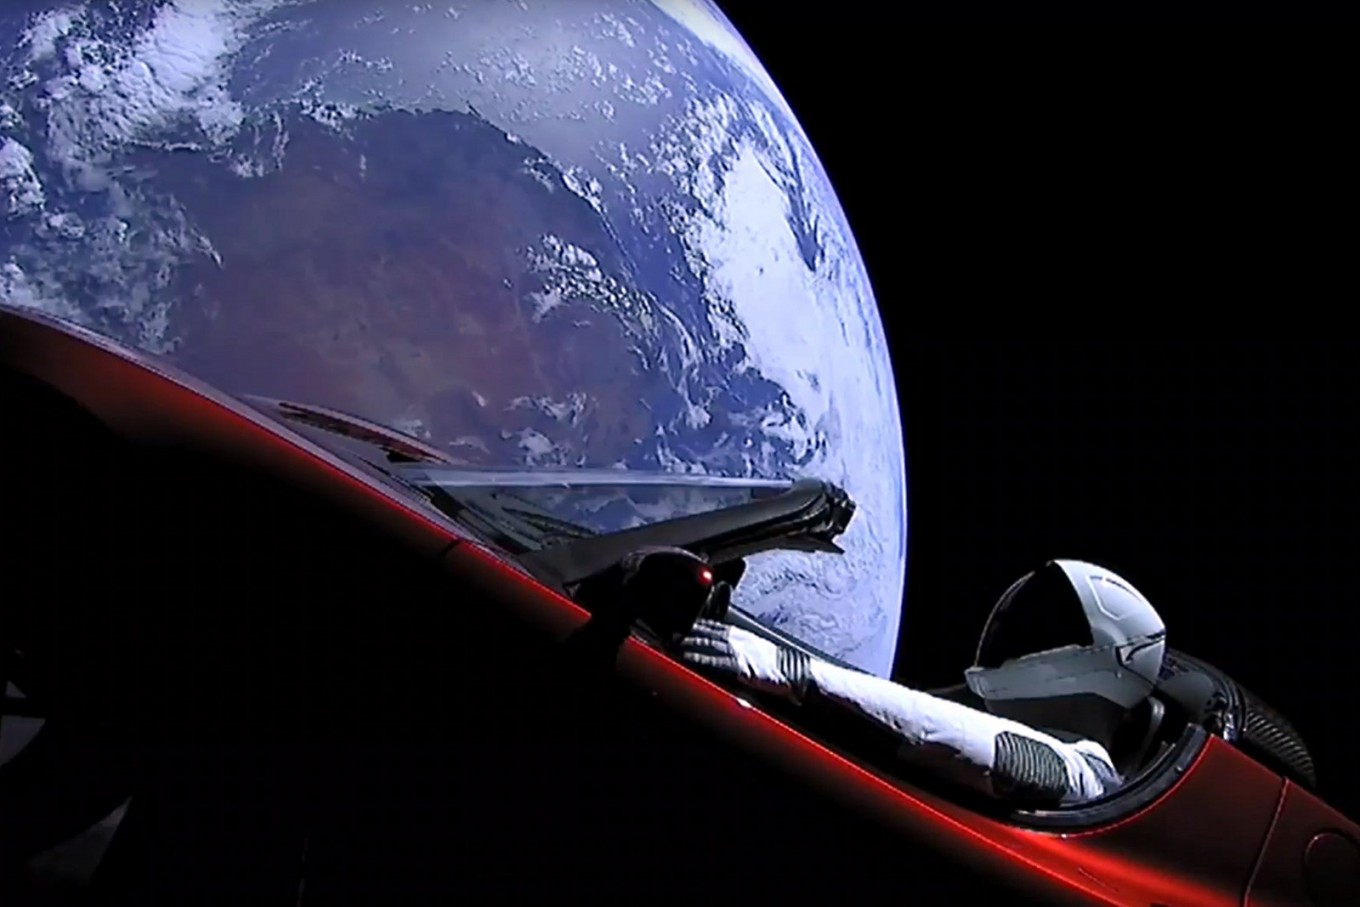 SpaceX beams cool video of Tesla in space Science & Tech The